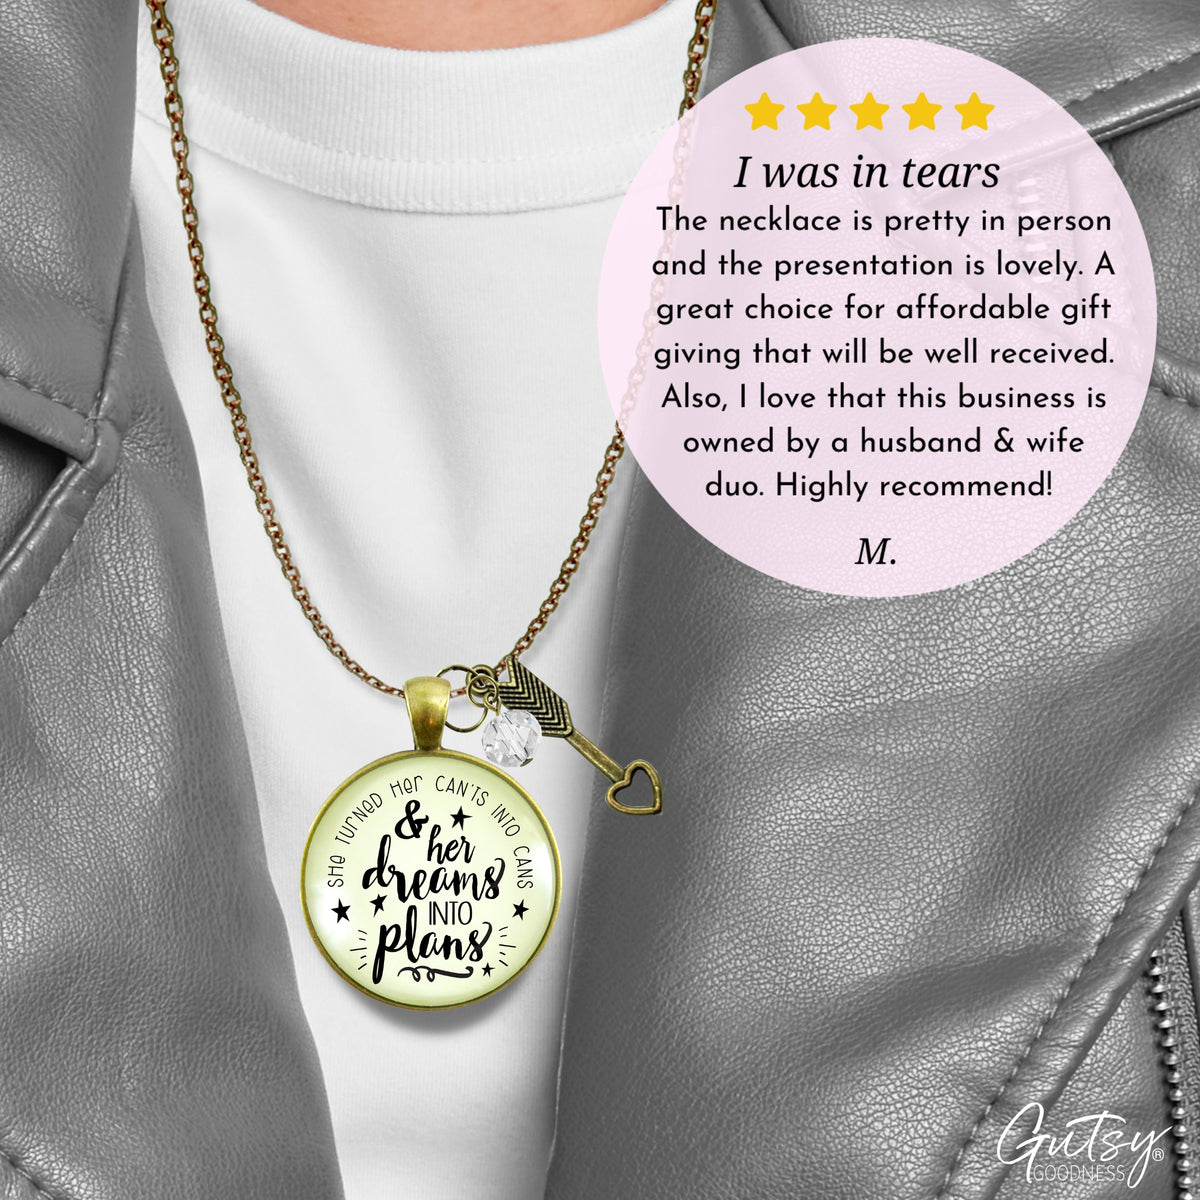 Dreams Into Plans Necklace Positive Life Words Boss Lady Jewelry  Necklace - Gutsy Goodness Handmade Jewelry